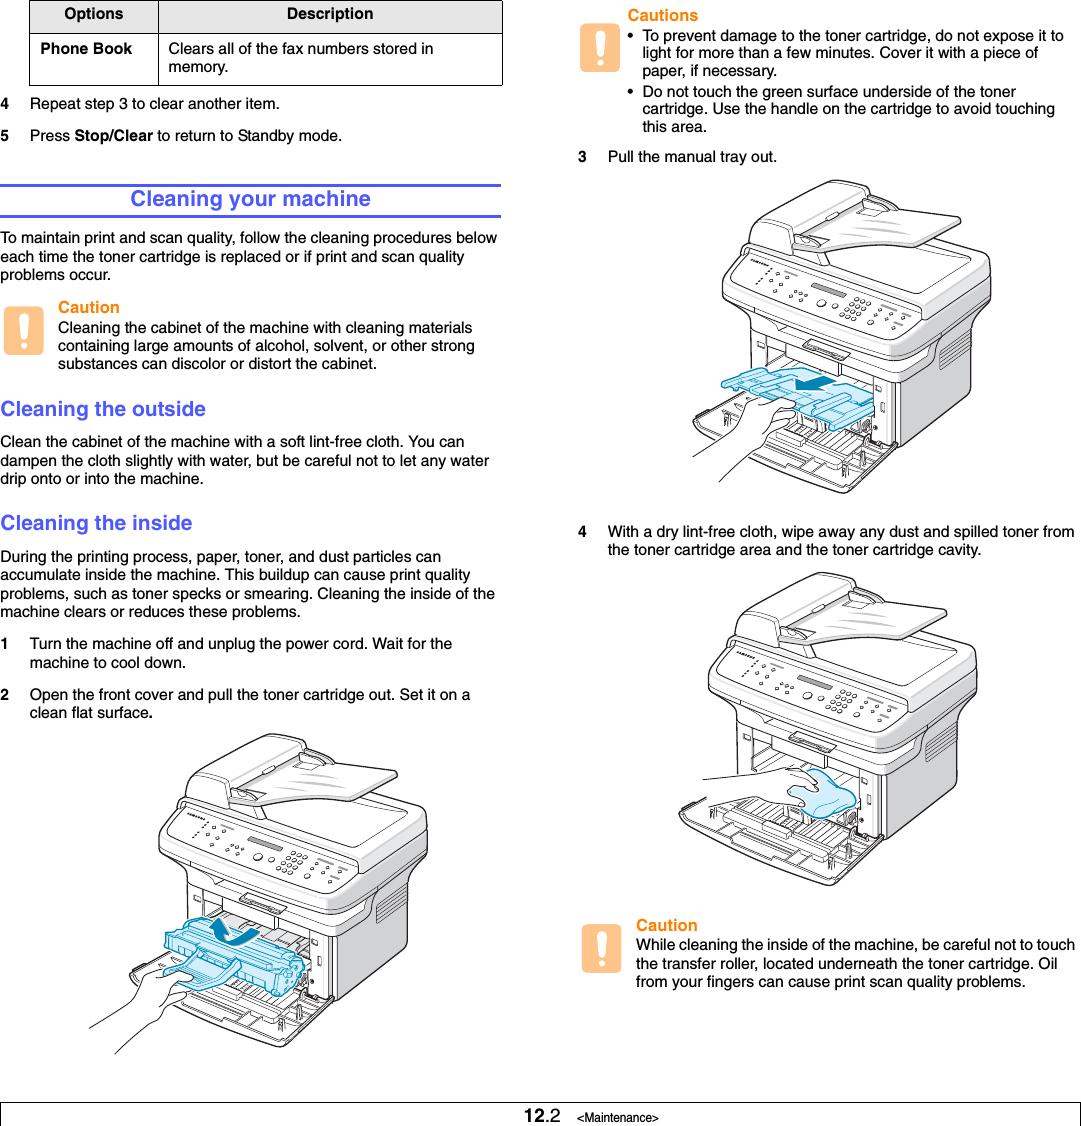 12.2   &lt;Maintenance&gt;4Repeat step 3 to clear another item.5Press Stop/Clear to return to Standby mode.Cleaning your machineTo maintain print and scan quality, follow the cleaning procedures below each time the toner cartridge is replaced or if print and scan quality problems occur.CautionCleaning the cabinet of the machine with cleaning materials containing large amounts of alcohol, solvent, or other strong substances can discolor or distort the cabinet.Cleaning the outsideClean the cabinet of the machine with a soft lint-free cloth. You can dampen the cloth slightly with water, but be careful not to let any water drip onto or into the machine.Cleaning the insideDuring the printing process, paper, toner, and dust particles can accumulate inside the machine. This buildup can cause print quality problems, such as toner specks or smearing. Cleaning the inside of the machine clears or reduces these problems.1Turn the machine off and unplug the power cord. Wait for the machine to cool down.2Open the front cover and pull the toner cartridge out. Set it on a clean flat surface.Phone Book Clears all of the fax numbers stored in memory.Options Description3Pull the manual tray out.4With a dry lint-free cloth, wipe away any dust and spilled toner from the toner cartridge area and the toner cartridge cavity.CautionWhile cleaning the inside of the machine, be careful not to touch the transfer roller, located underneath the toner cartridge. Oil from your fingers can cause print scan quality problems. Cautions• To prevent damage to the toner cartridge, do not expose it to light for more than a few minutes. Cover it with a piece of paper, if necessary. • Do not touch the green surface underside of the toner cartridge. Use the handle on the cartridge to avoid touching this area.